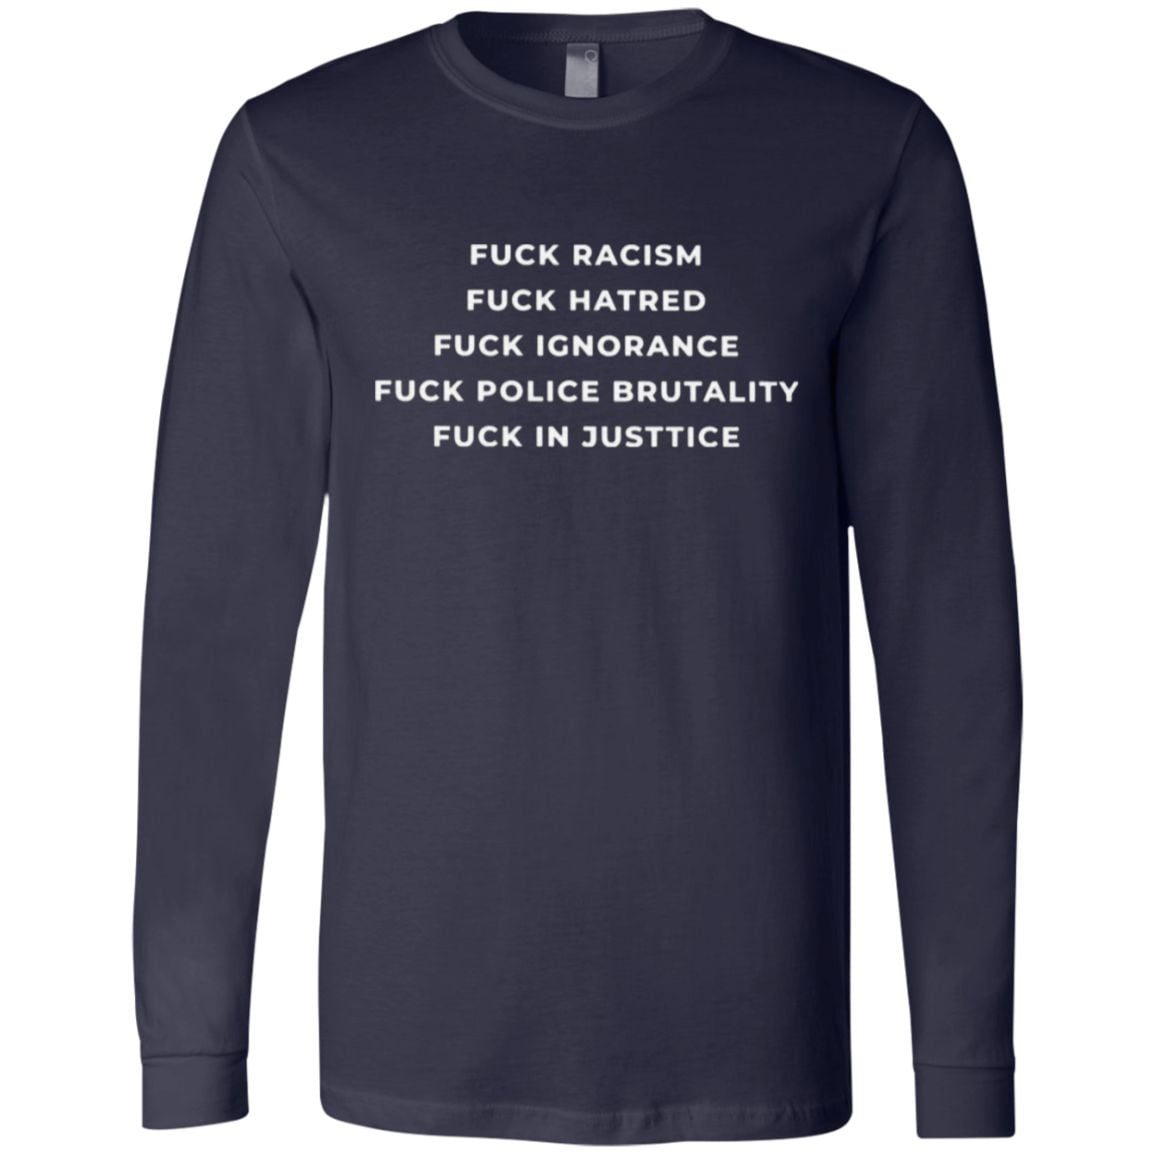 Fuck Racism Hatred Ignorance Police Brutality Fuck In Justice T Shirt